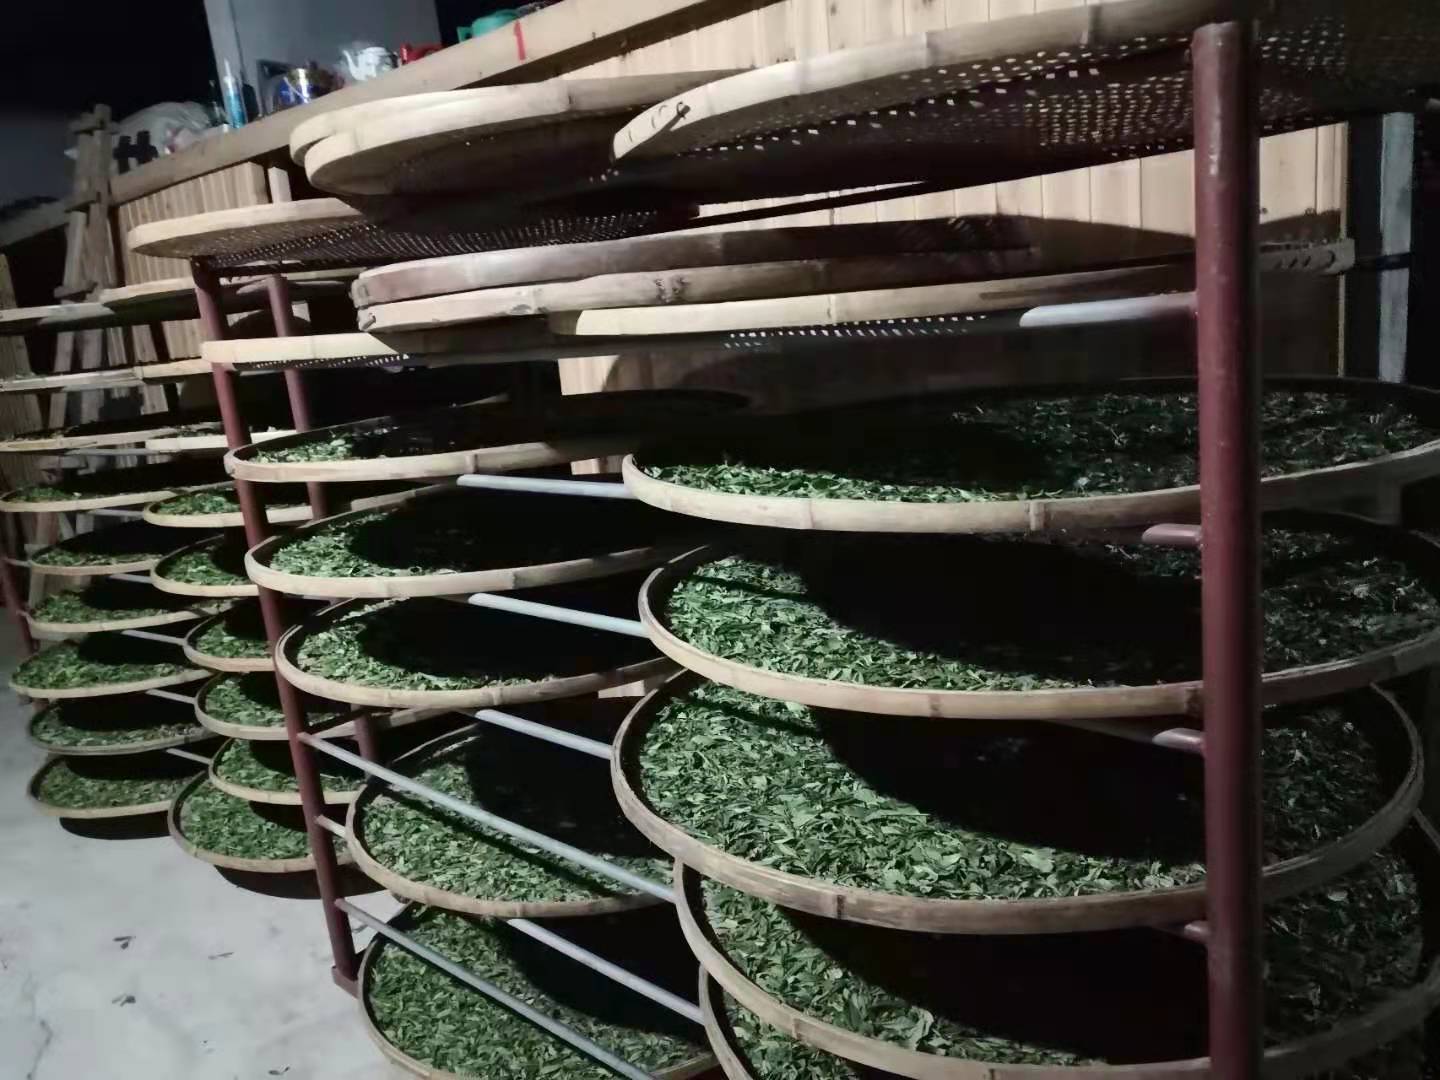 Vertical racks of round bamboo trays spread with thin layers of Laocong Shuixian (Old Bush Narcissus) tea leaves withering.